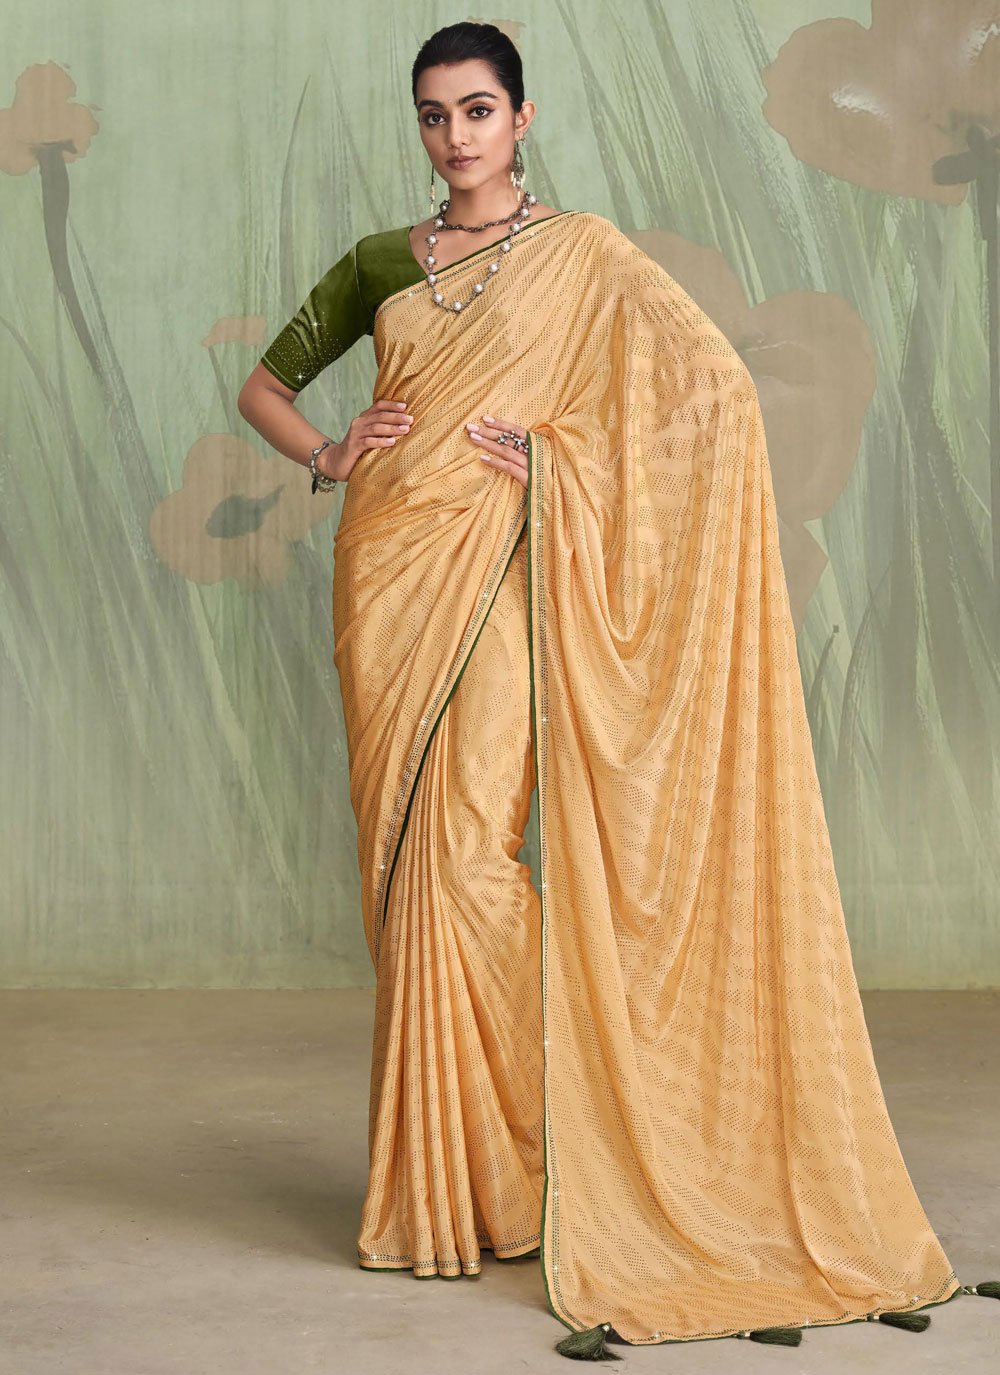 The most affordable saree material